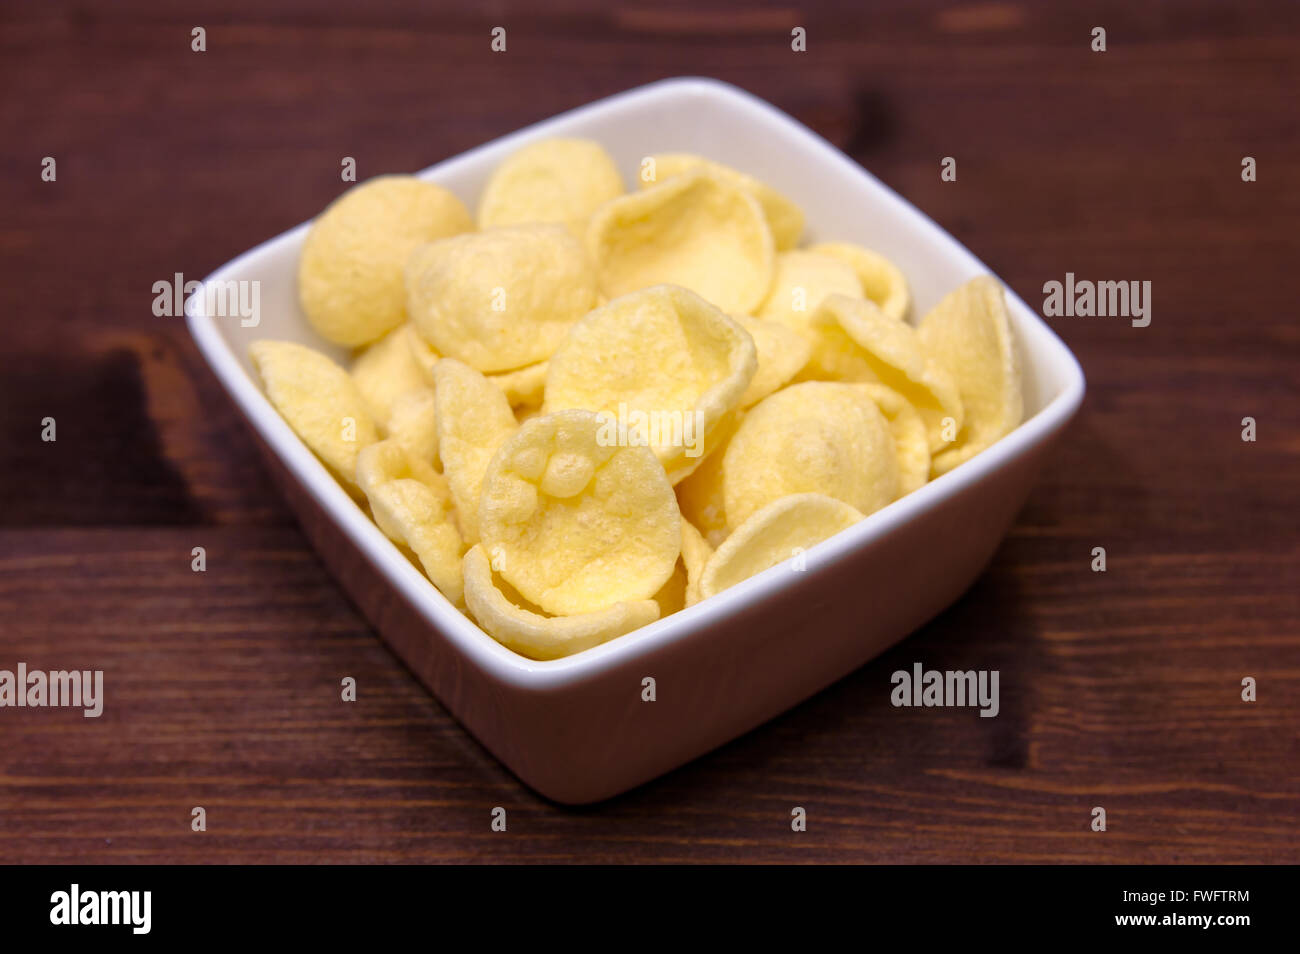 Potato snacks on a square bowl on wooden table Stock Photo